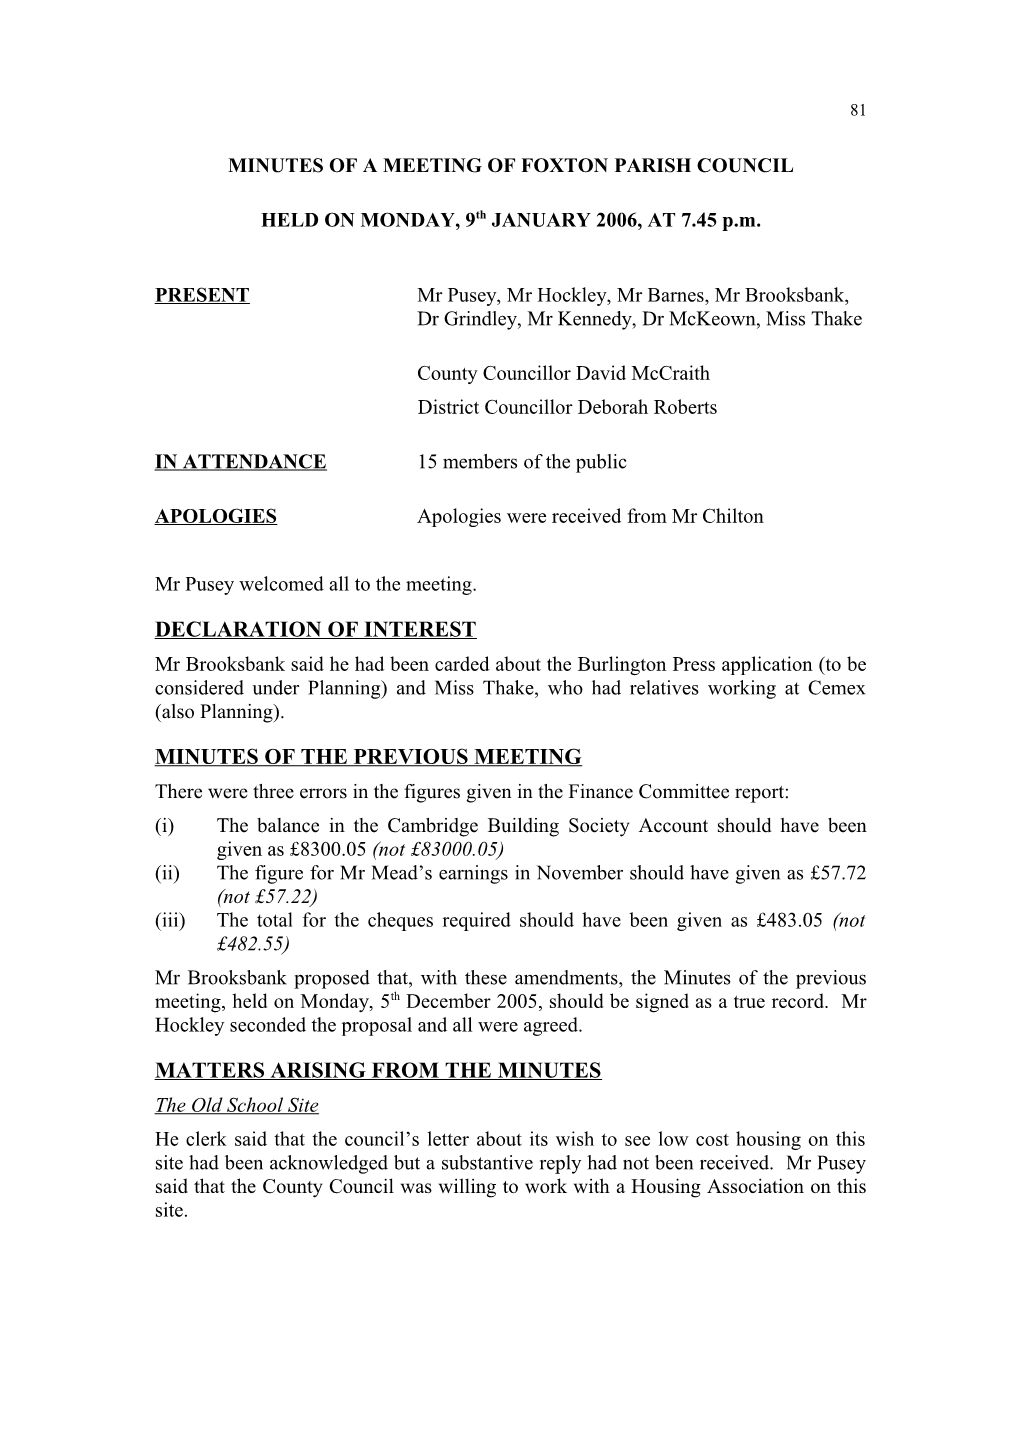 Minutes of a Meeting of Foxton Parish Council s1